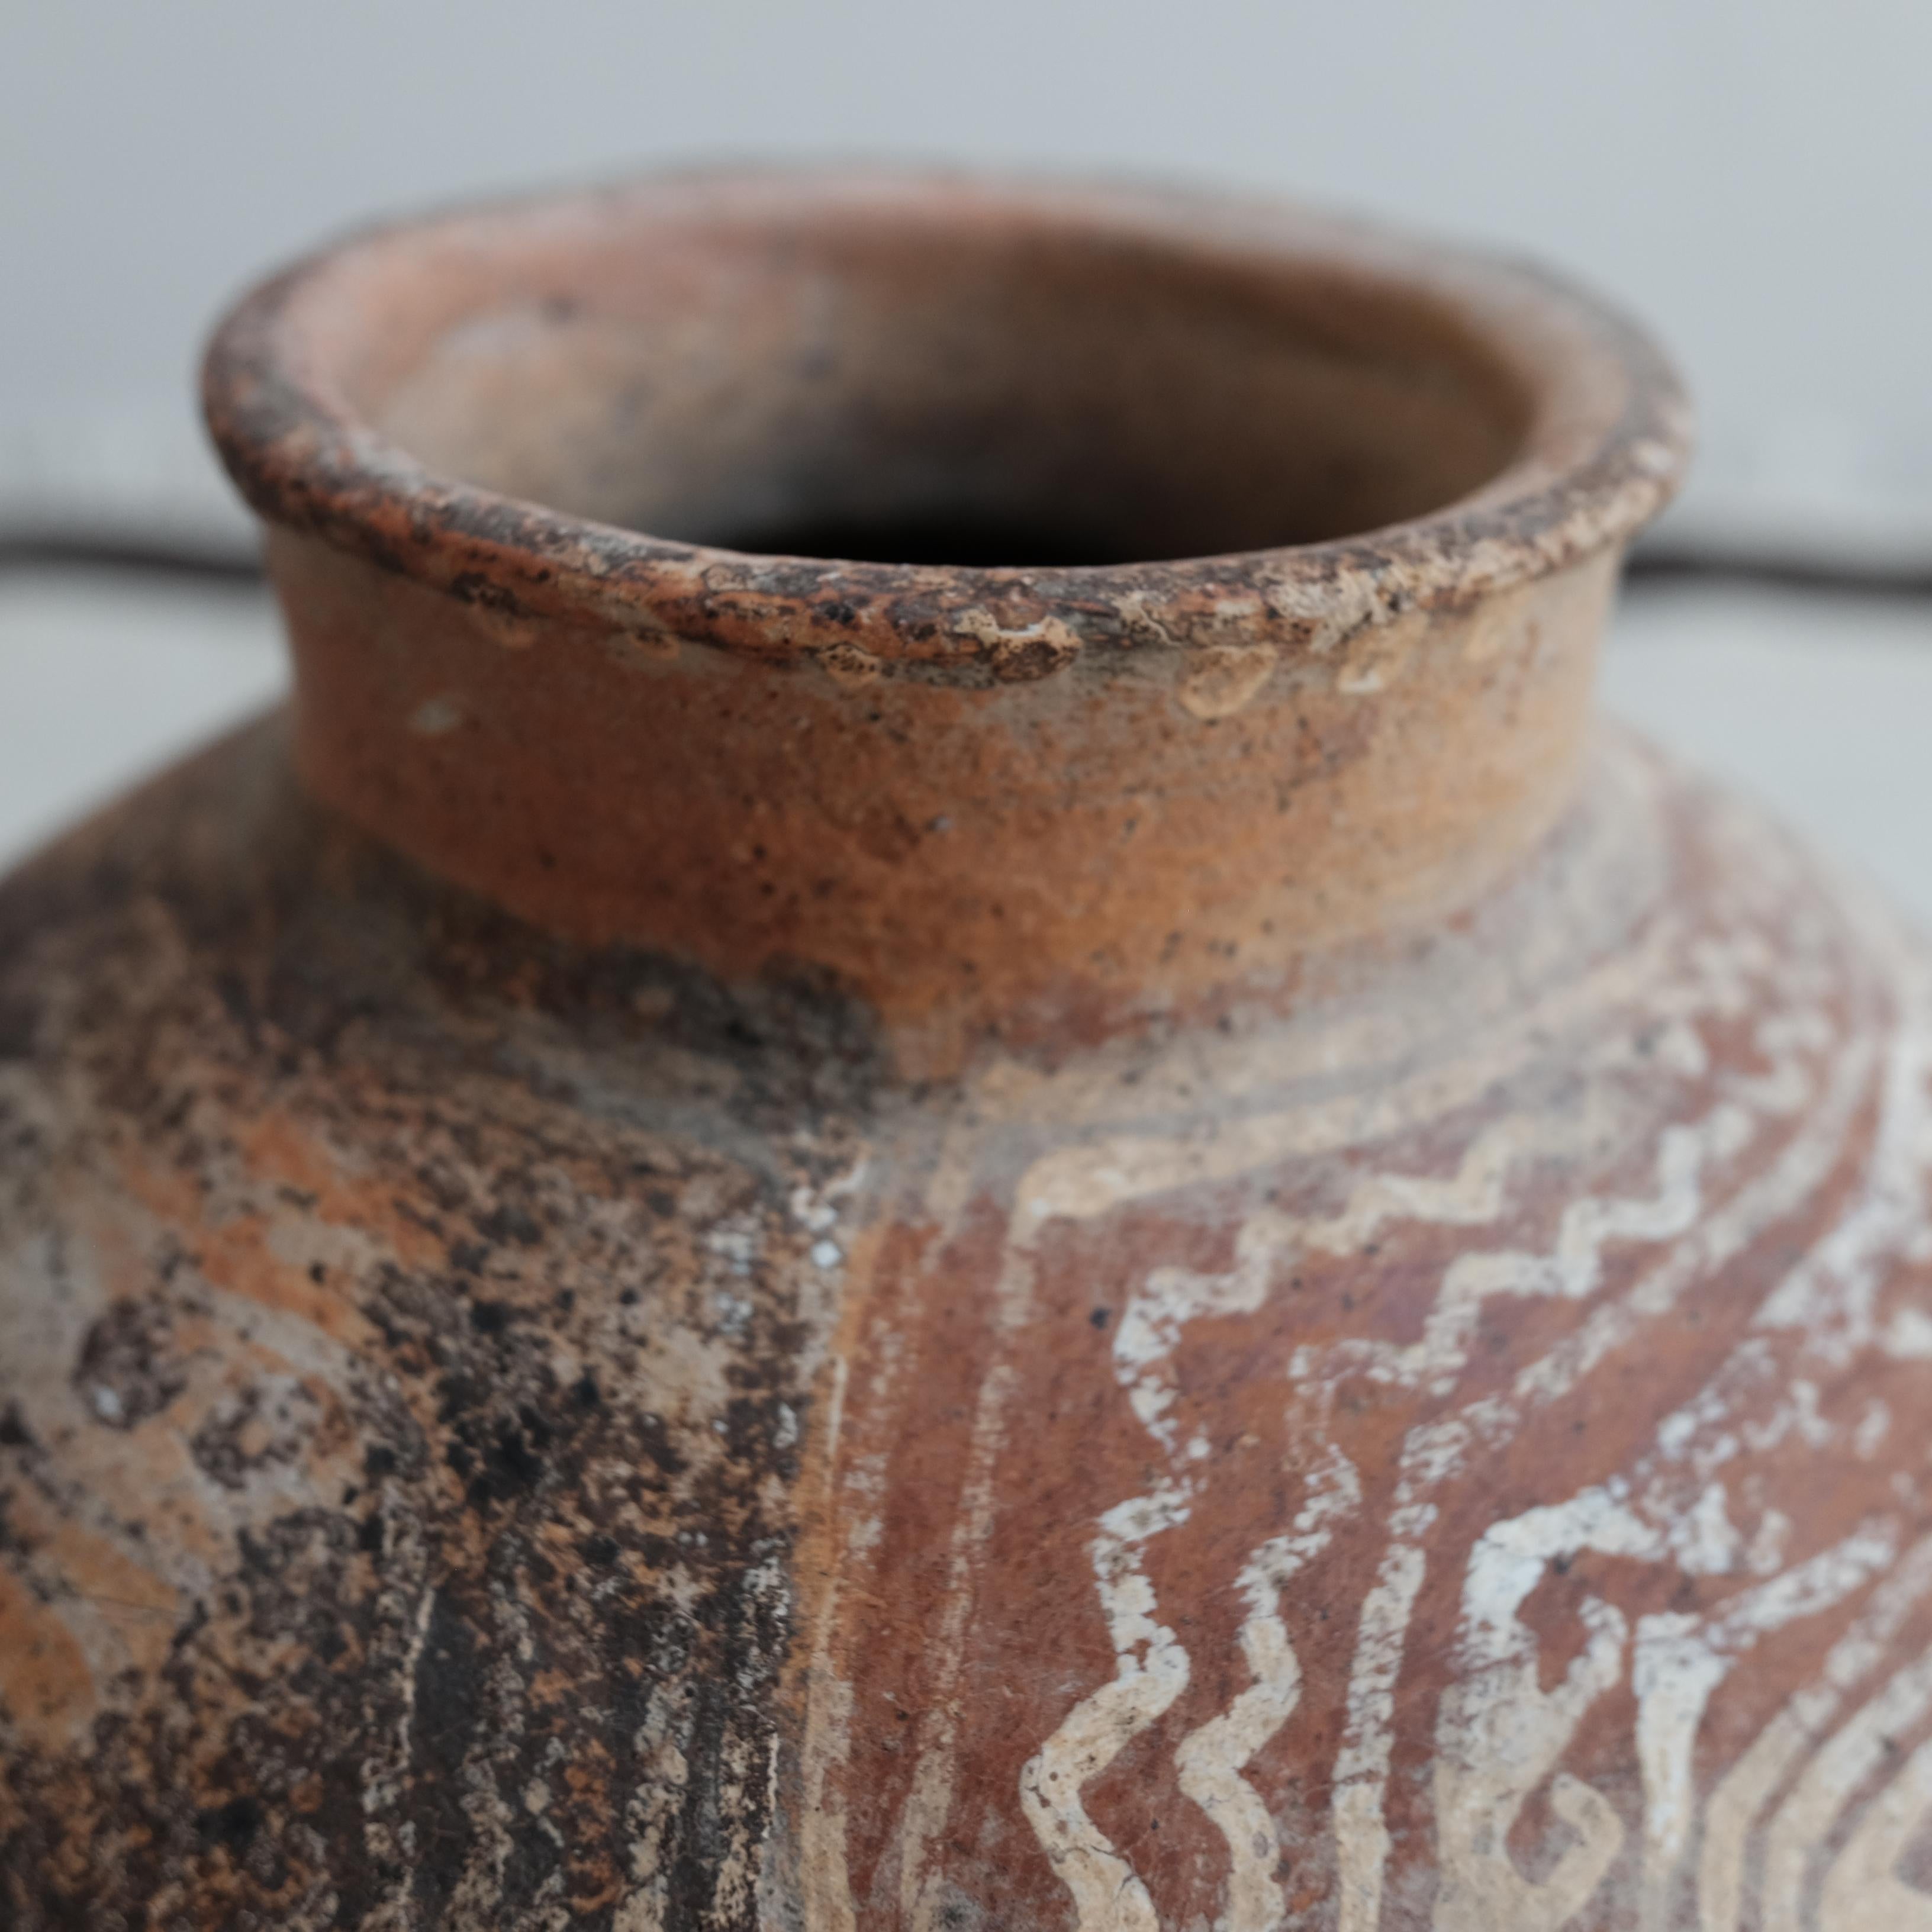 Pre-Colombian vessel from northern Nayarit, Mexico. Elaborately painted. Most likely post-classic, 1200-1500 AD. Culture and exact origin unknown.